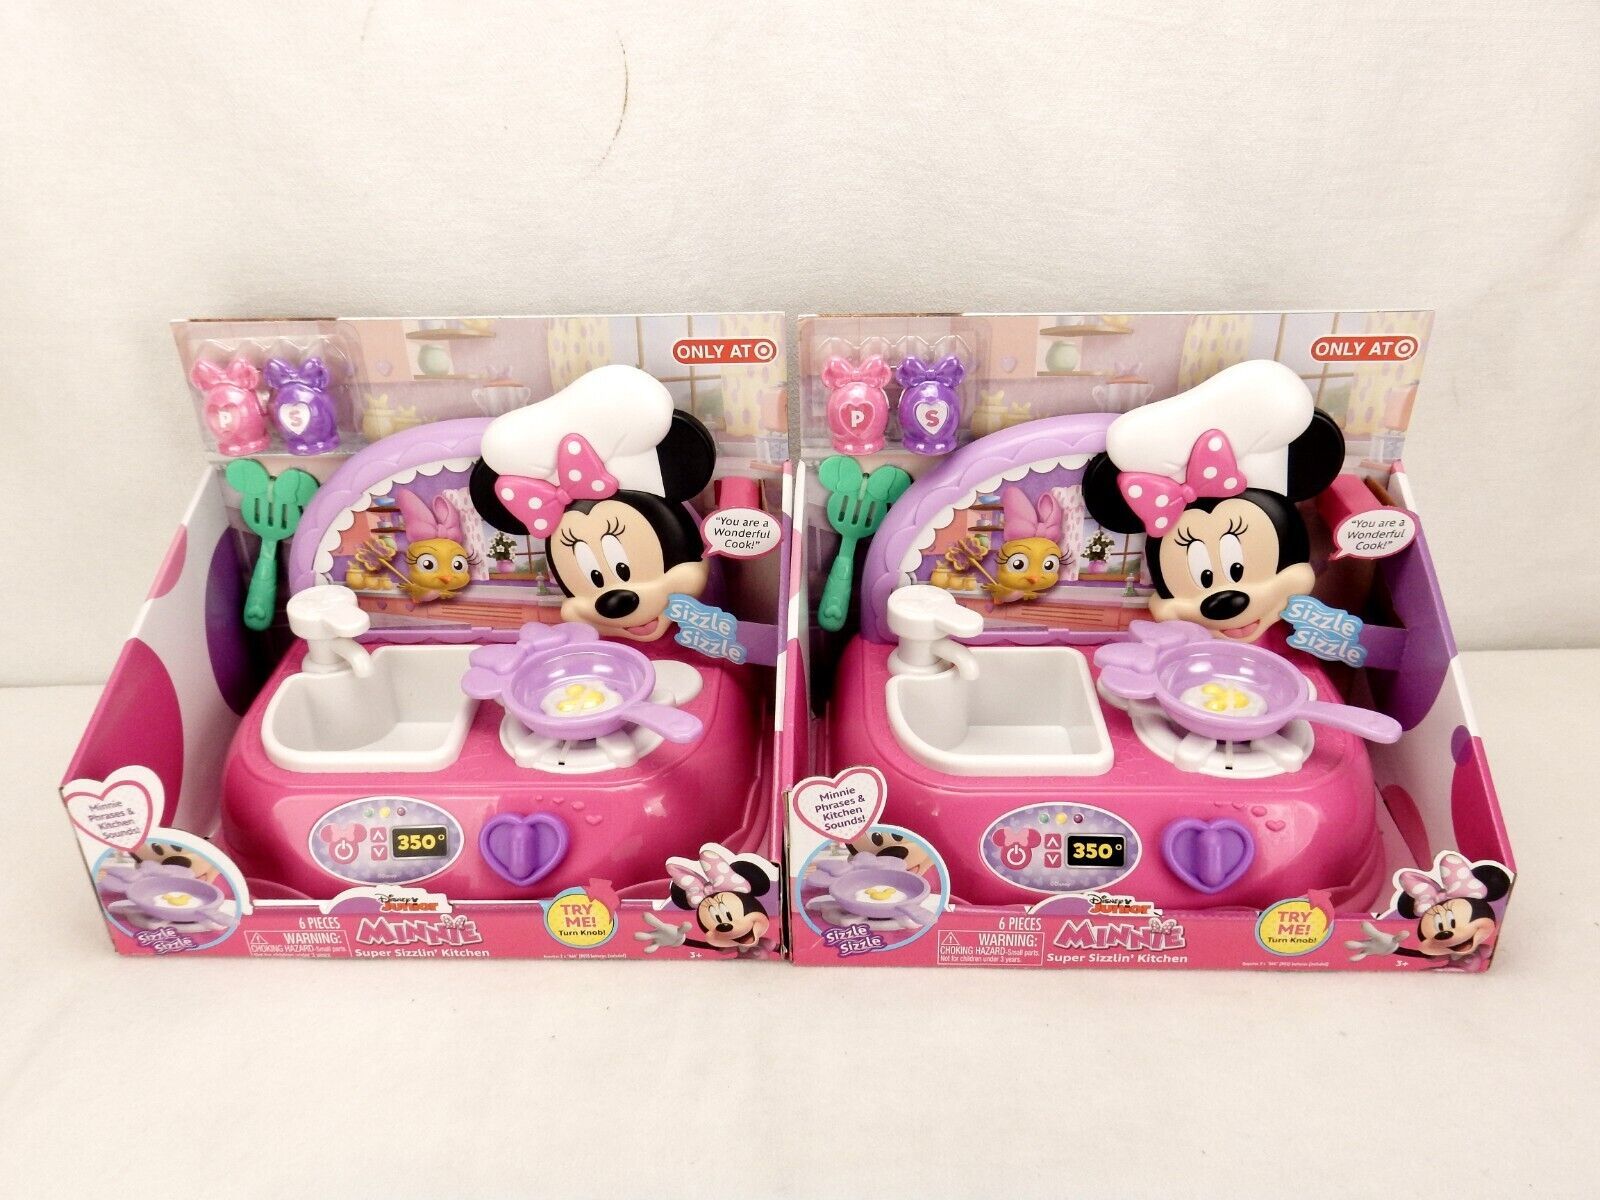 Case Lot of 2 Disney Minnie Sizzlin' Kitchen Play Sets, Cooking Sounds & Phrases - $26.58